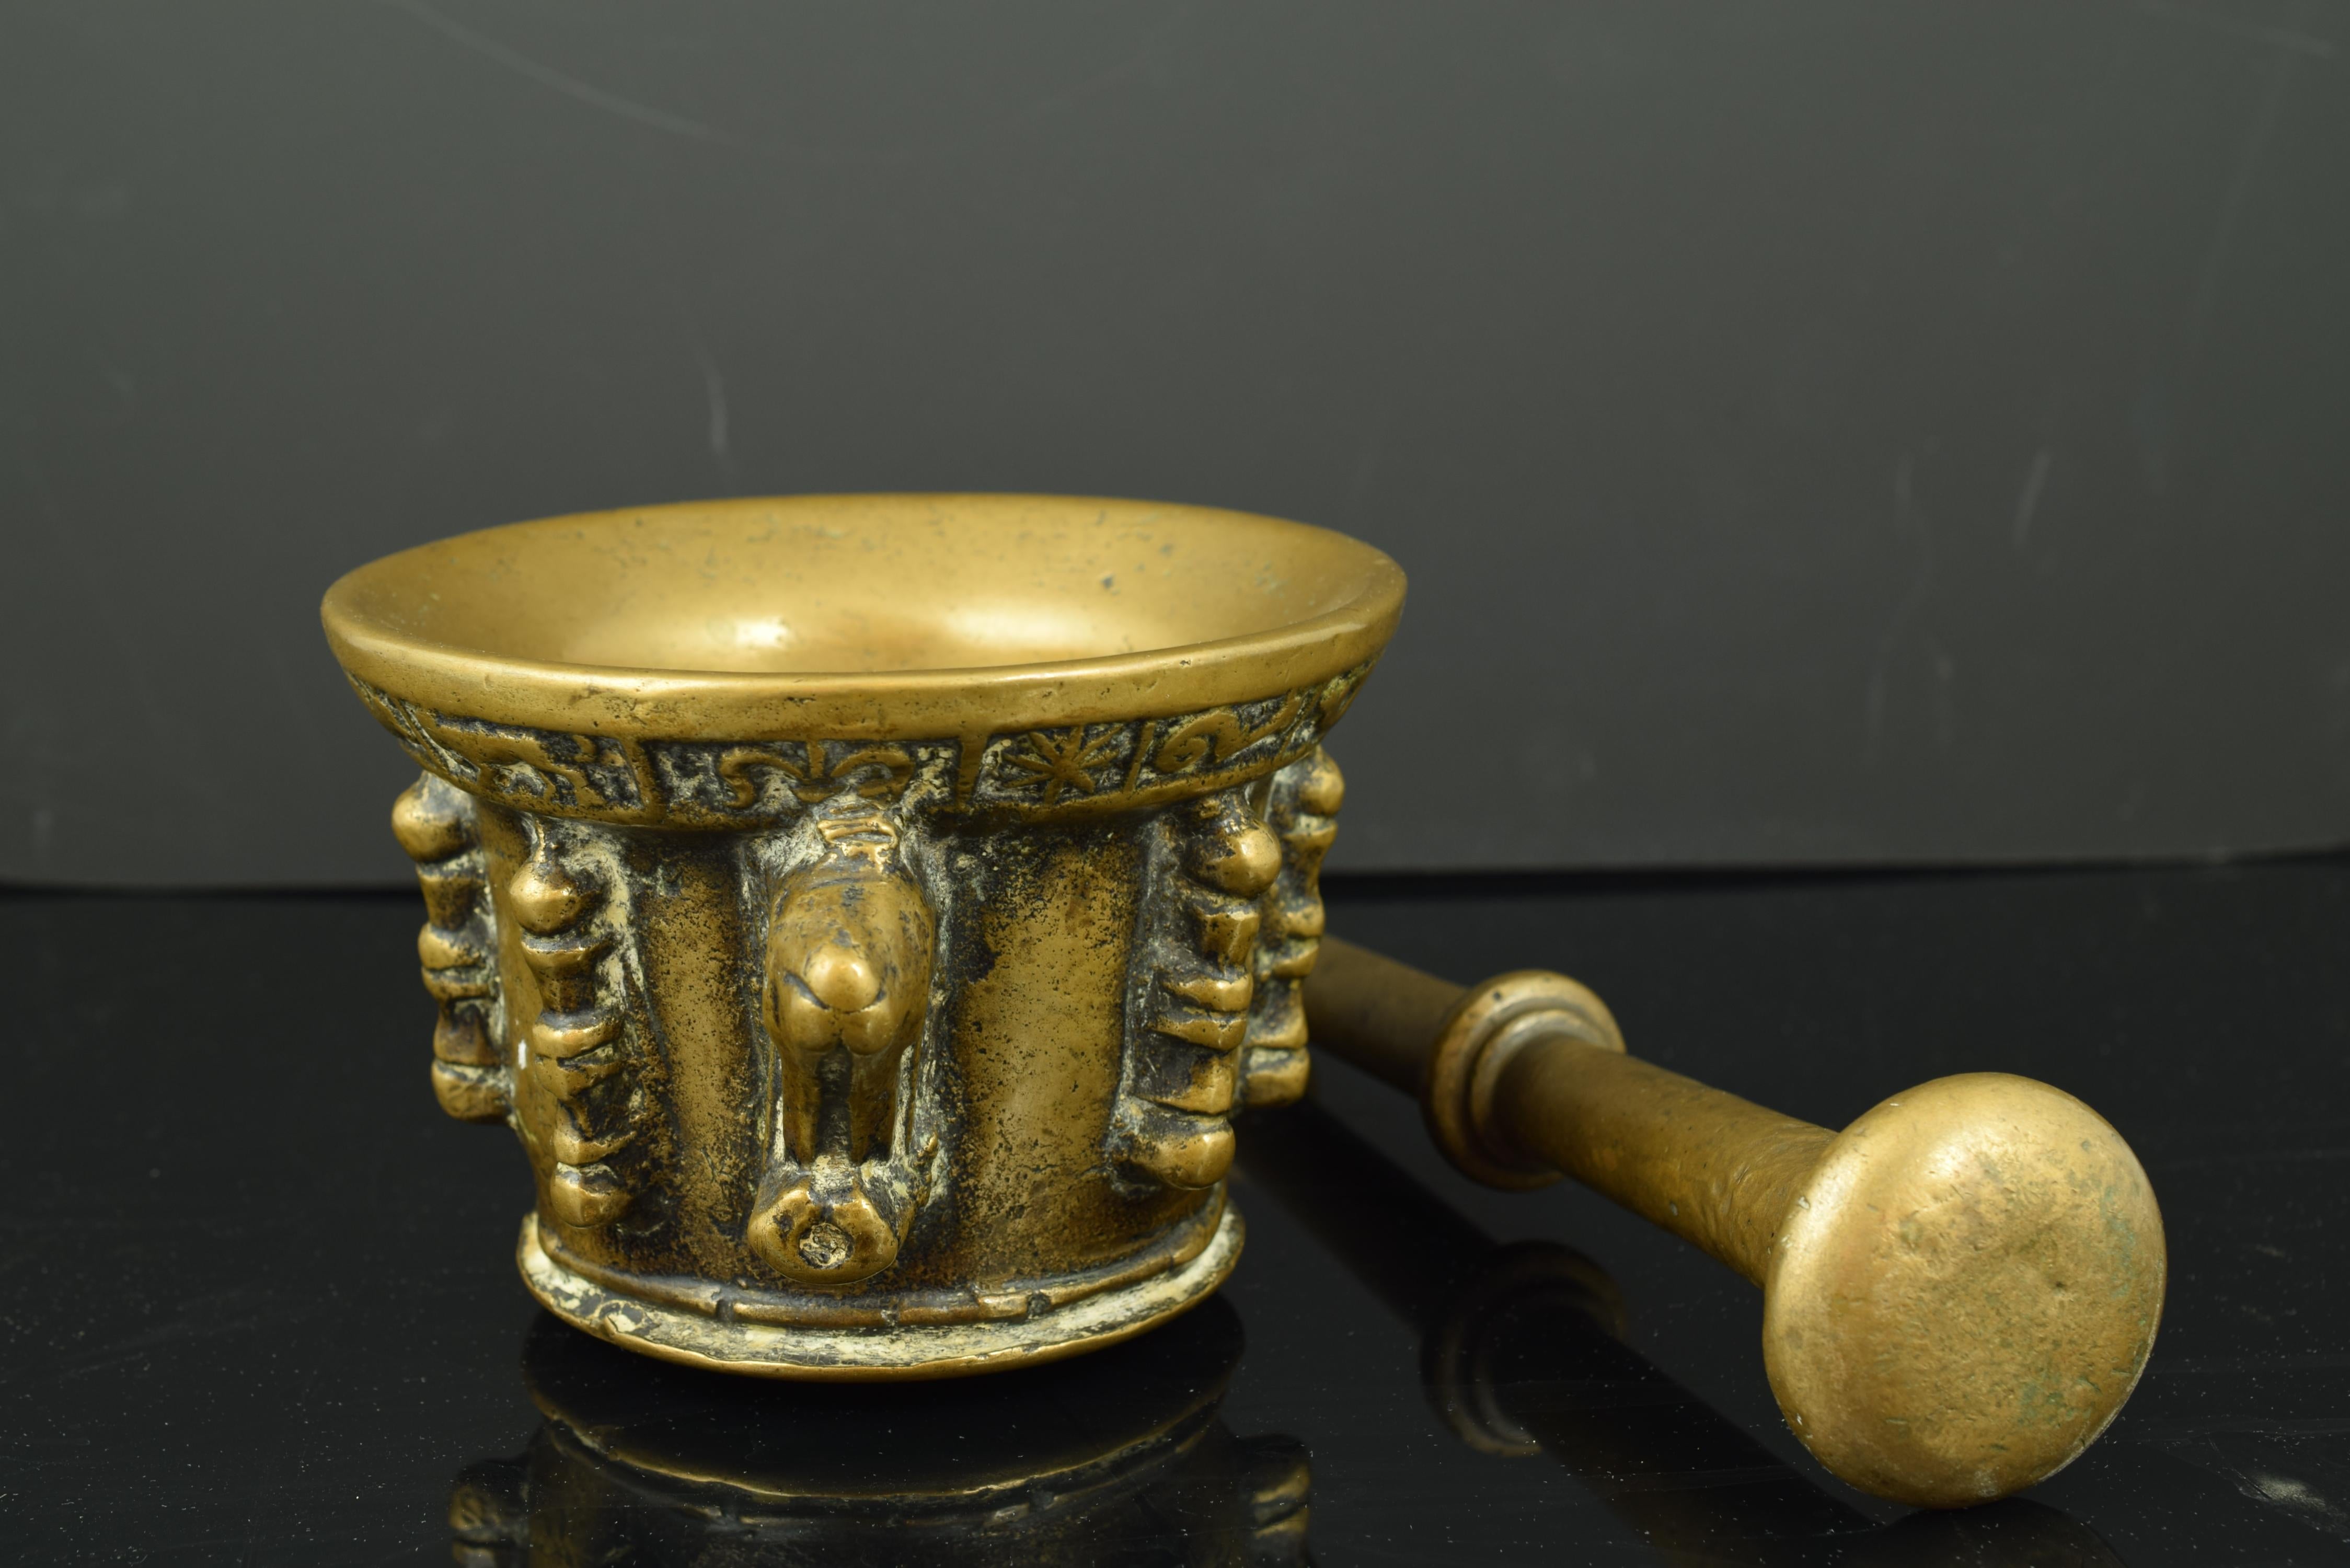 The mortar presents decoration in relief based on ribs, pearls and columns, two handles and an upper band with vegetal elements and stars, as well as two handles. The pestle, of circular section and smooth shaft, shows a central semicircular molding